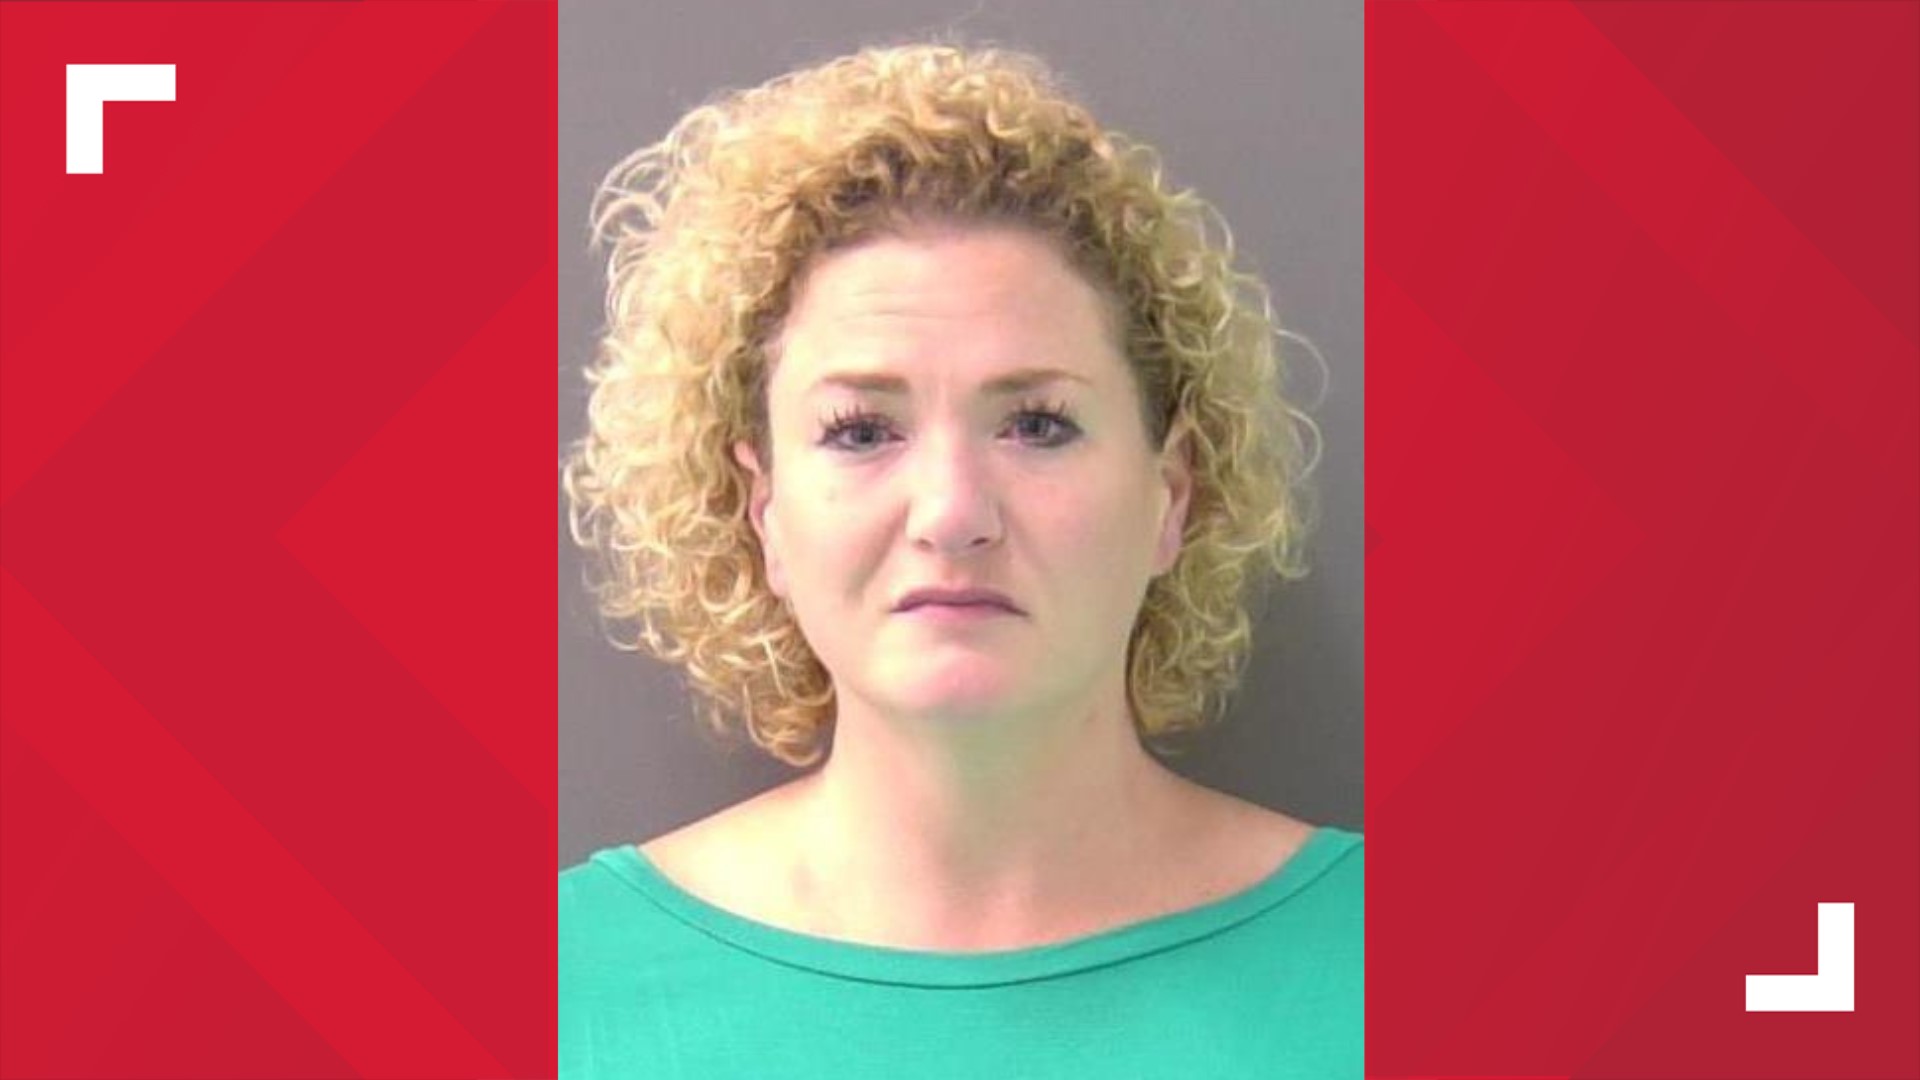 A former Temple High School teacher was arrested after an investigation into allegations about her having an inappropriate relationship with a student.